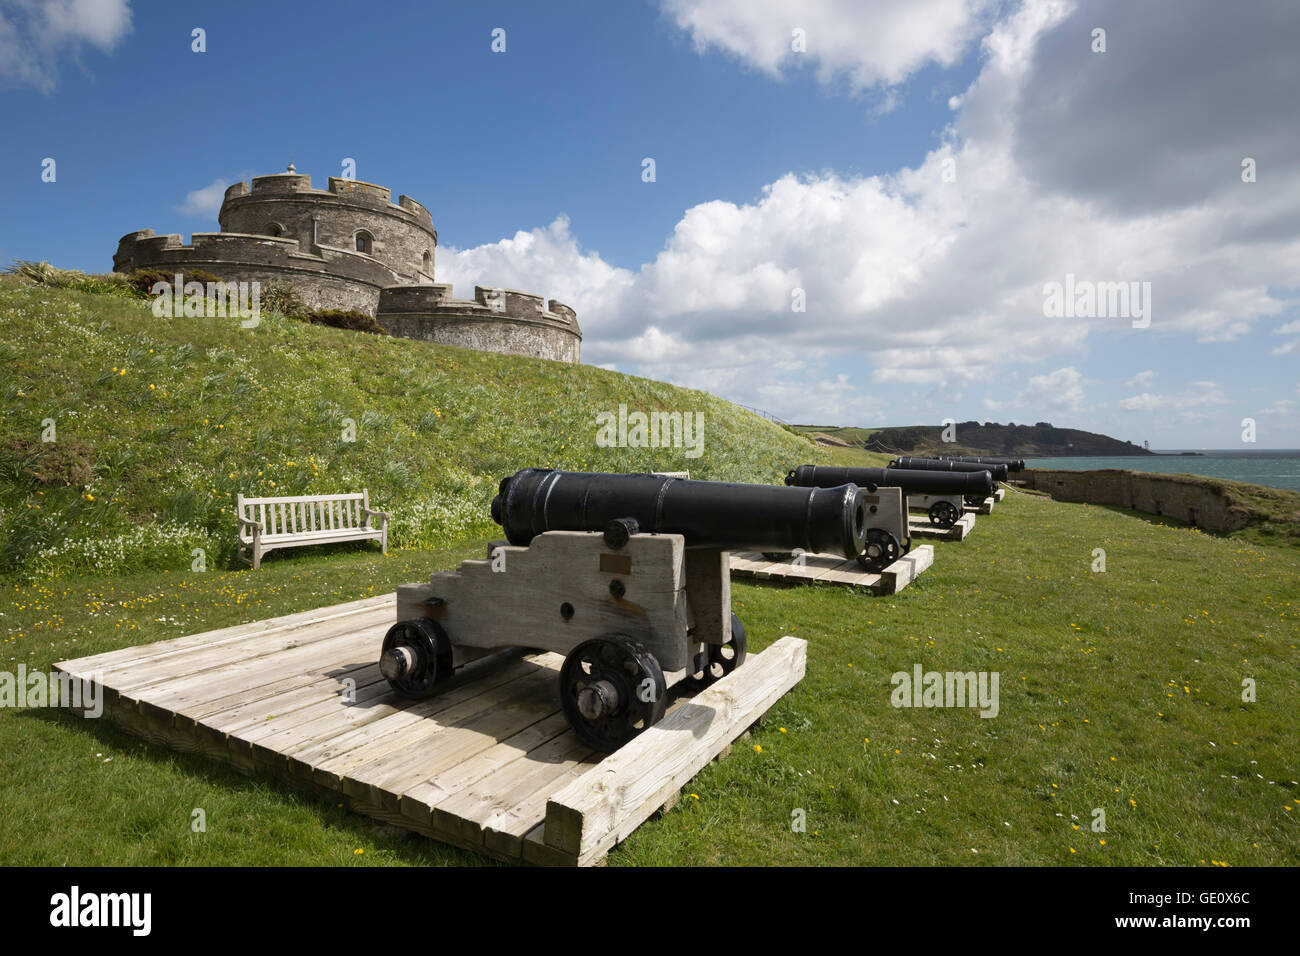 St Mawes Castle and cannons, St Mawes, Cornwall, England, United Kingdom, Europe Stock Photo